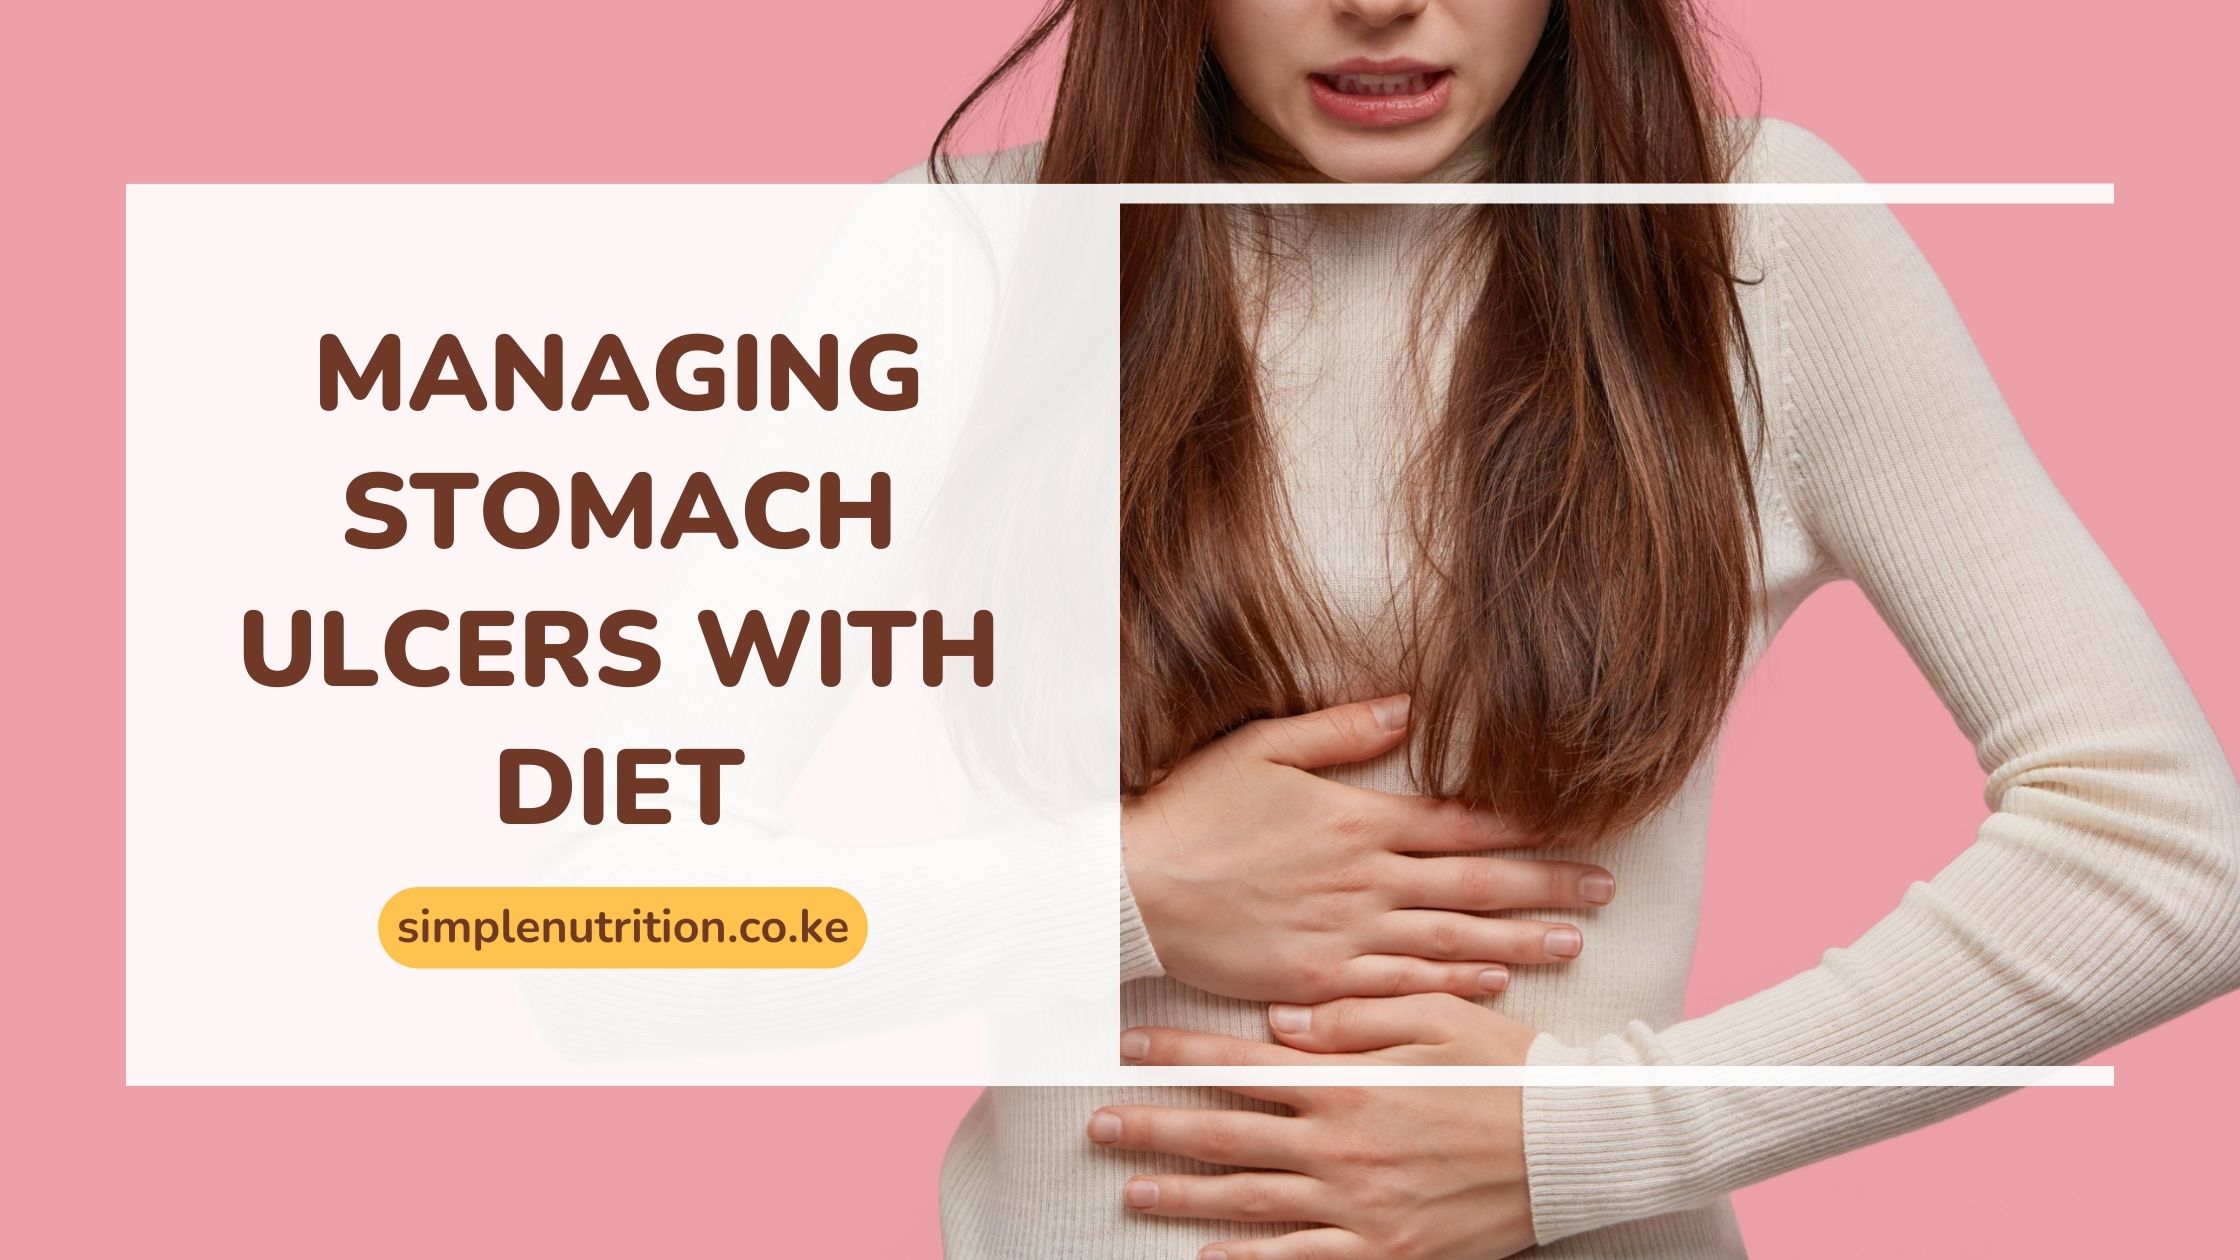 How to Manage stomach ulcers through diet choices.